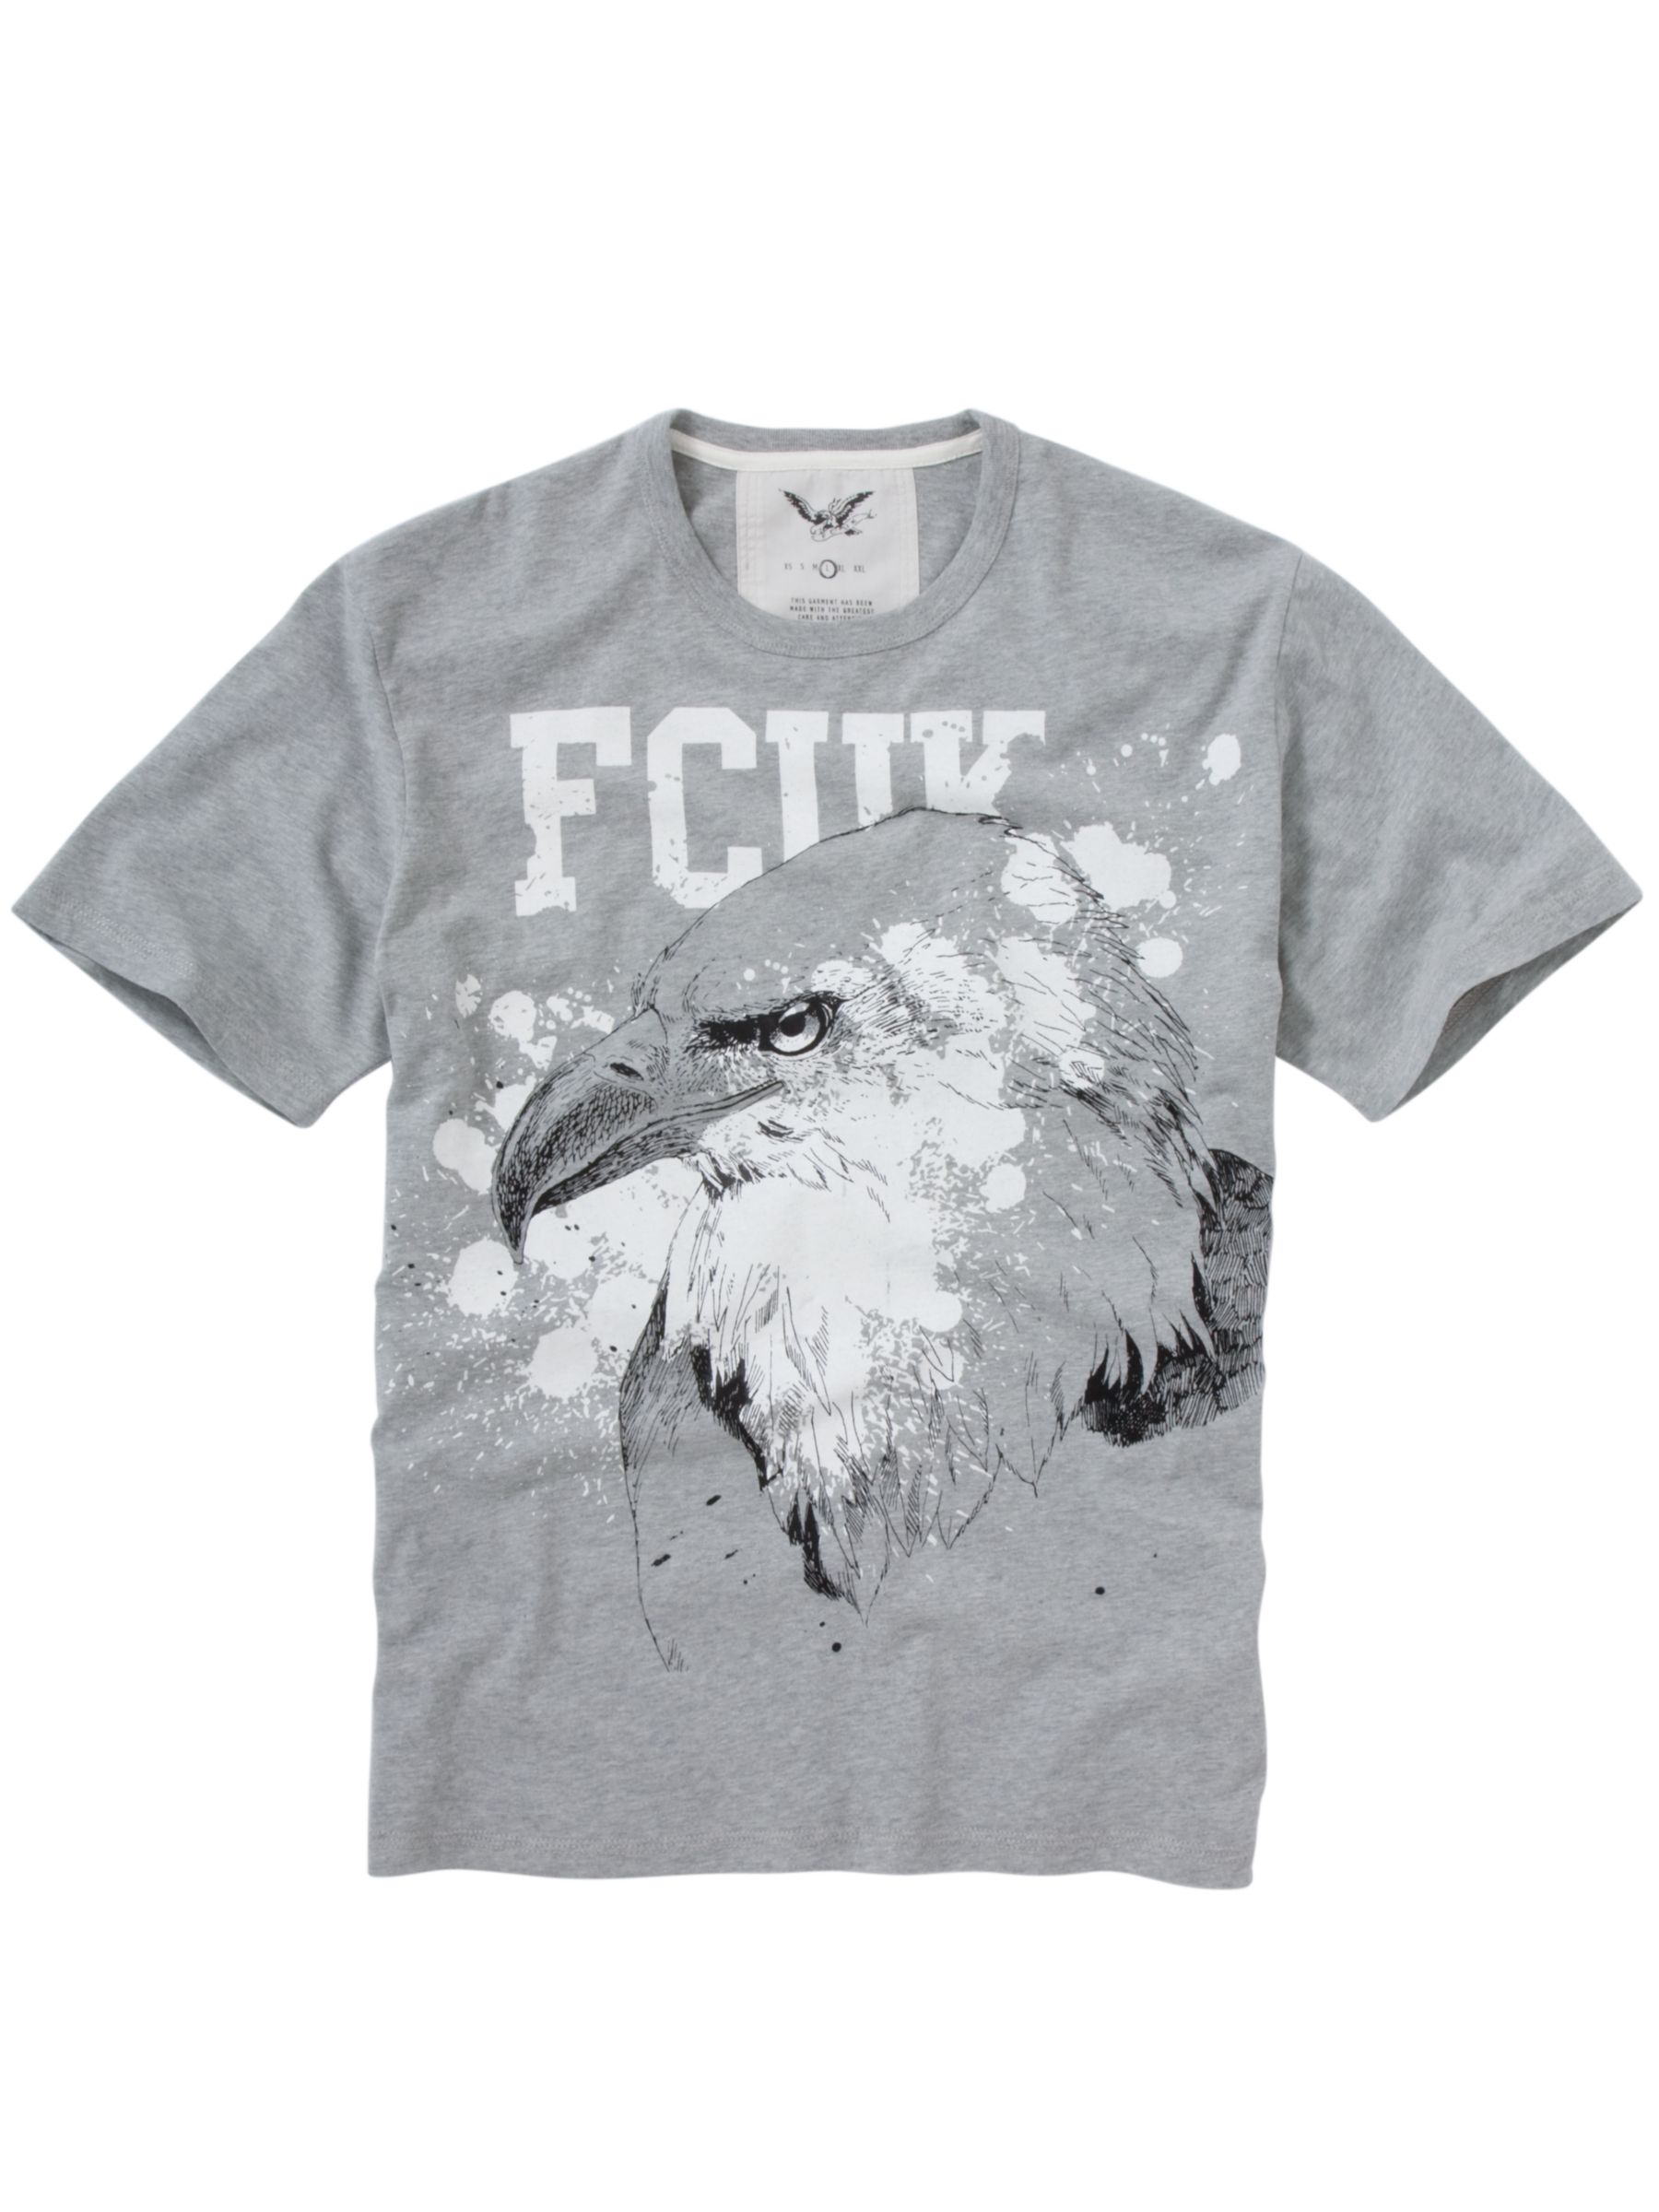 French Connection Eagle Print T-Shirt, Grey